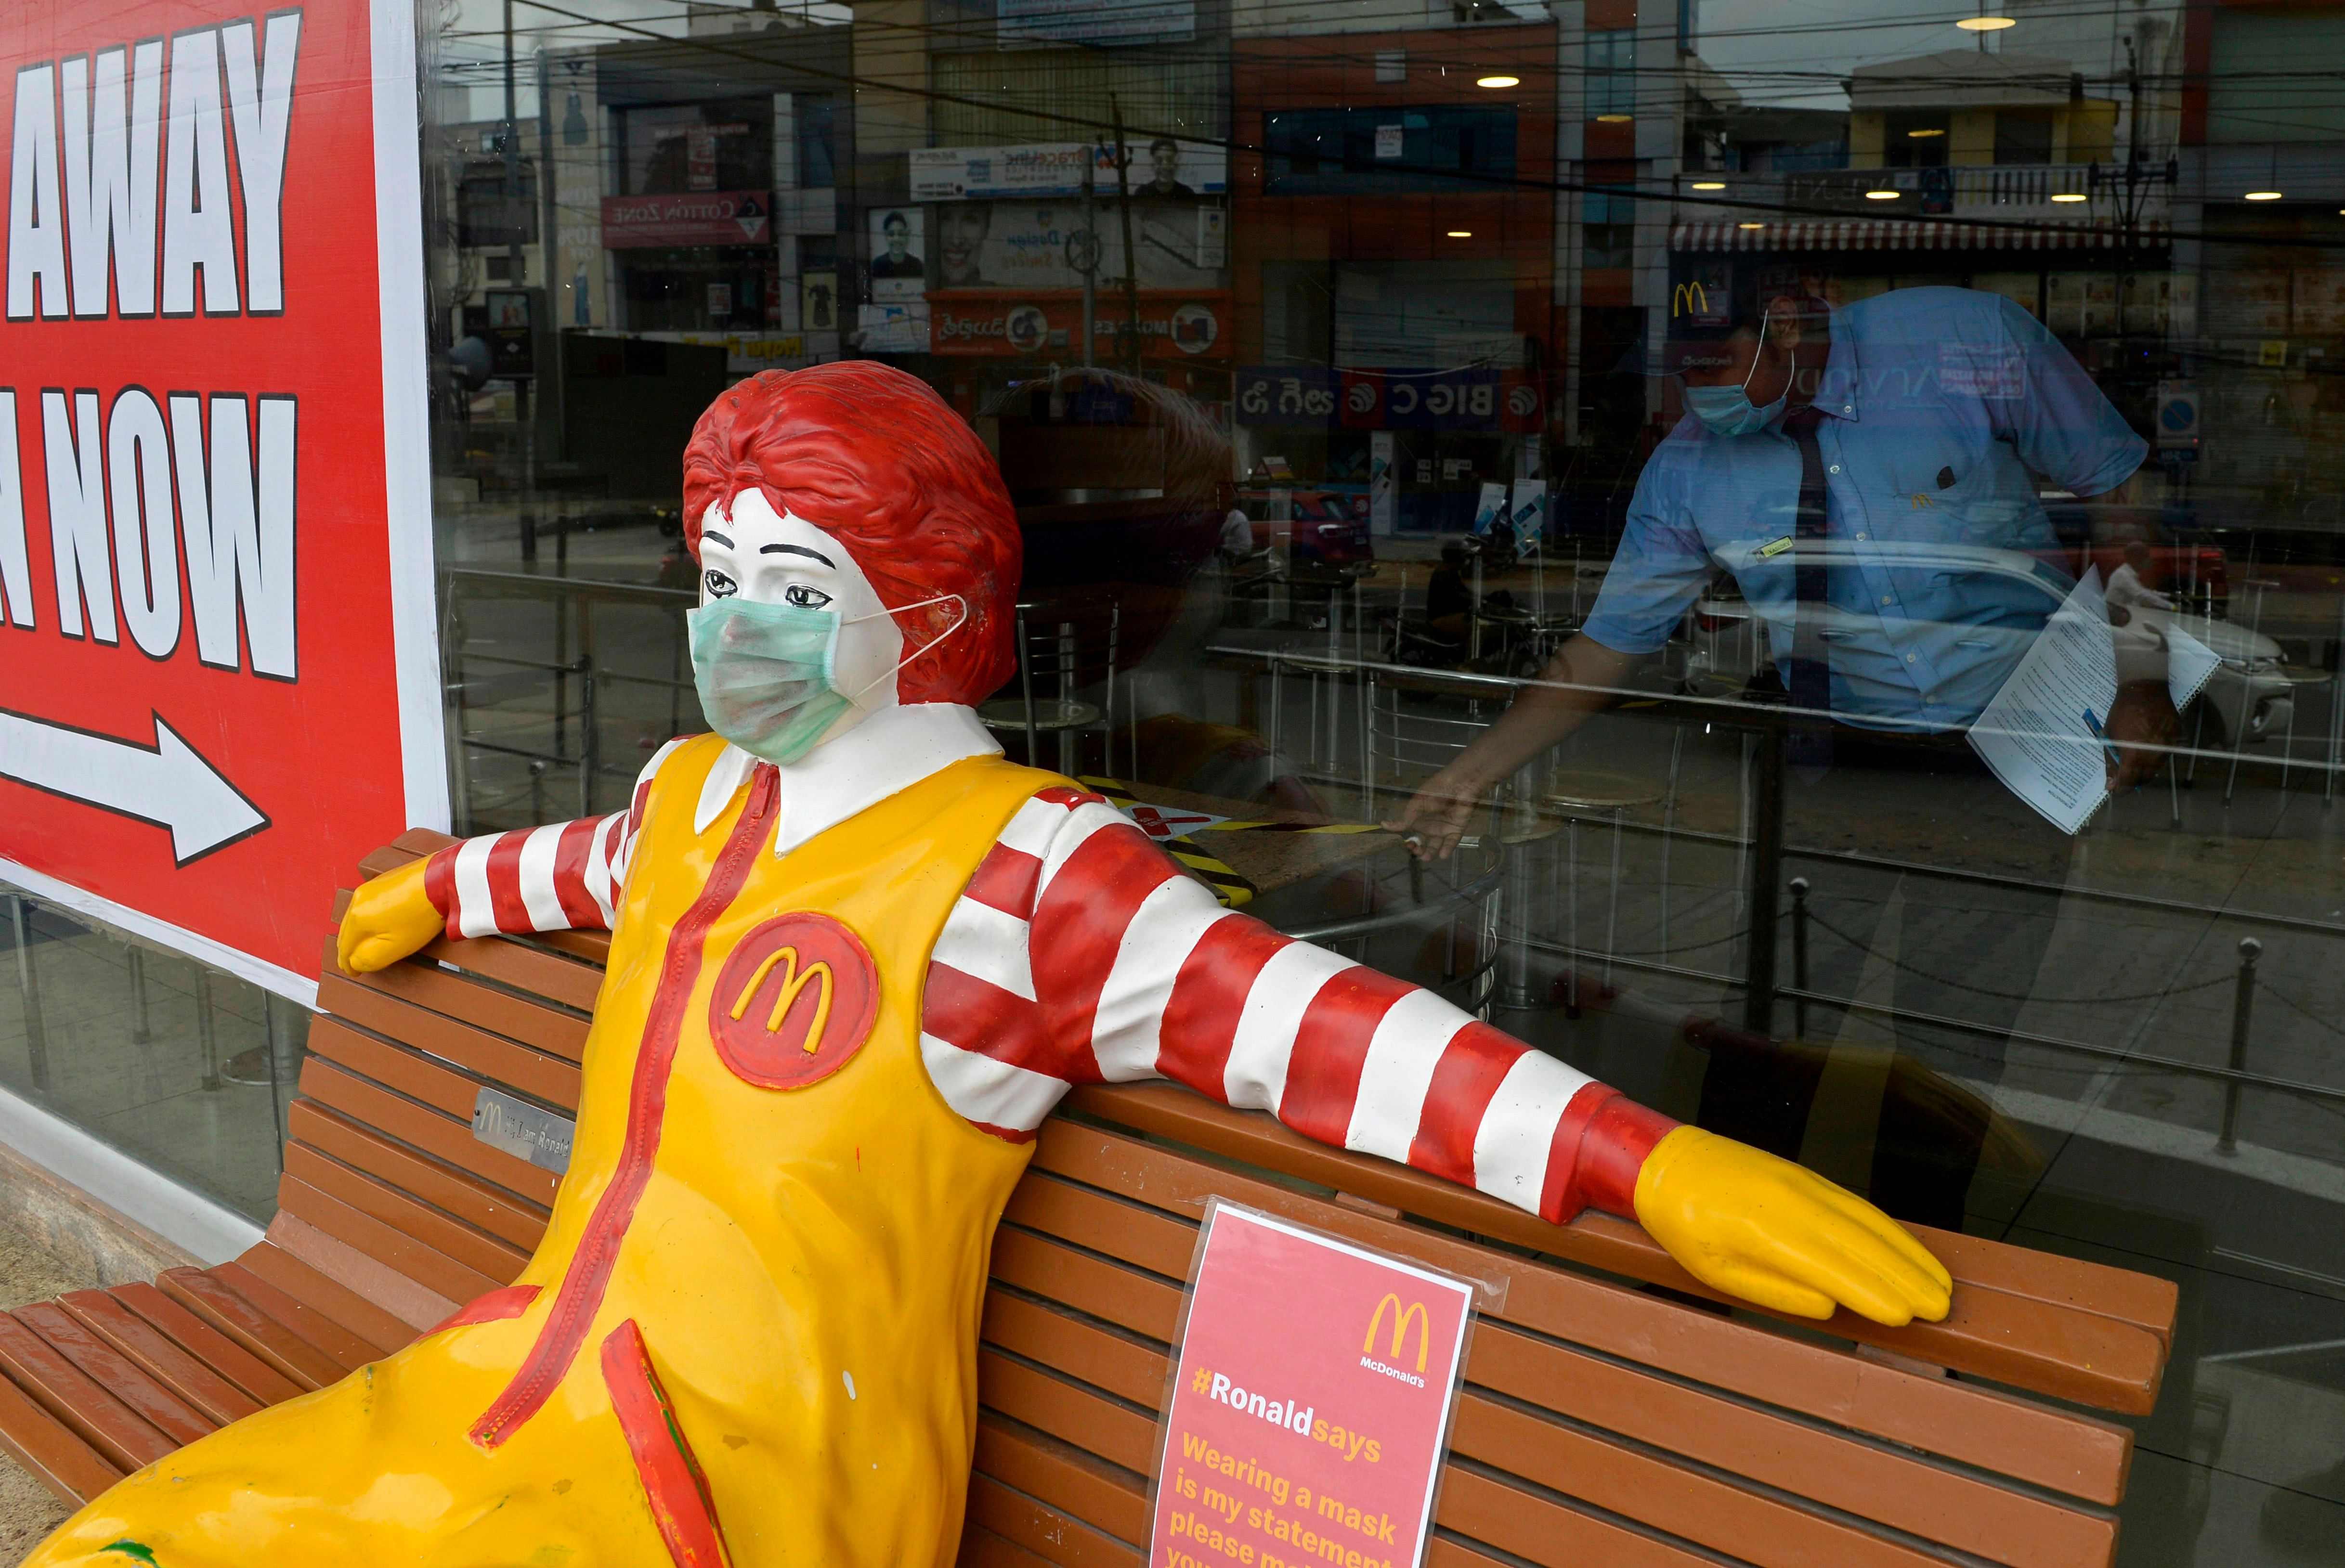 A face mask is seen on Ronald McDonald, the mascot of fast-food company McDonald's, as an employee works inside its outlet after the authorities eased restrictions imposed as a preventive measure against the spread of the COVID-19 in Hyderabad. Credits: AFP Photo